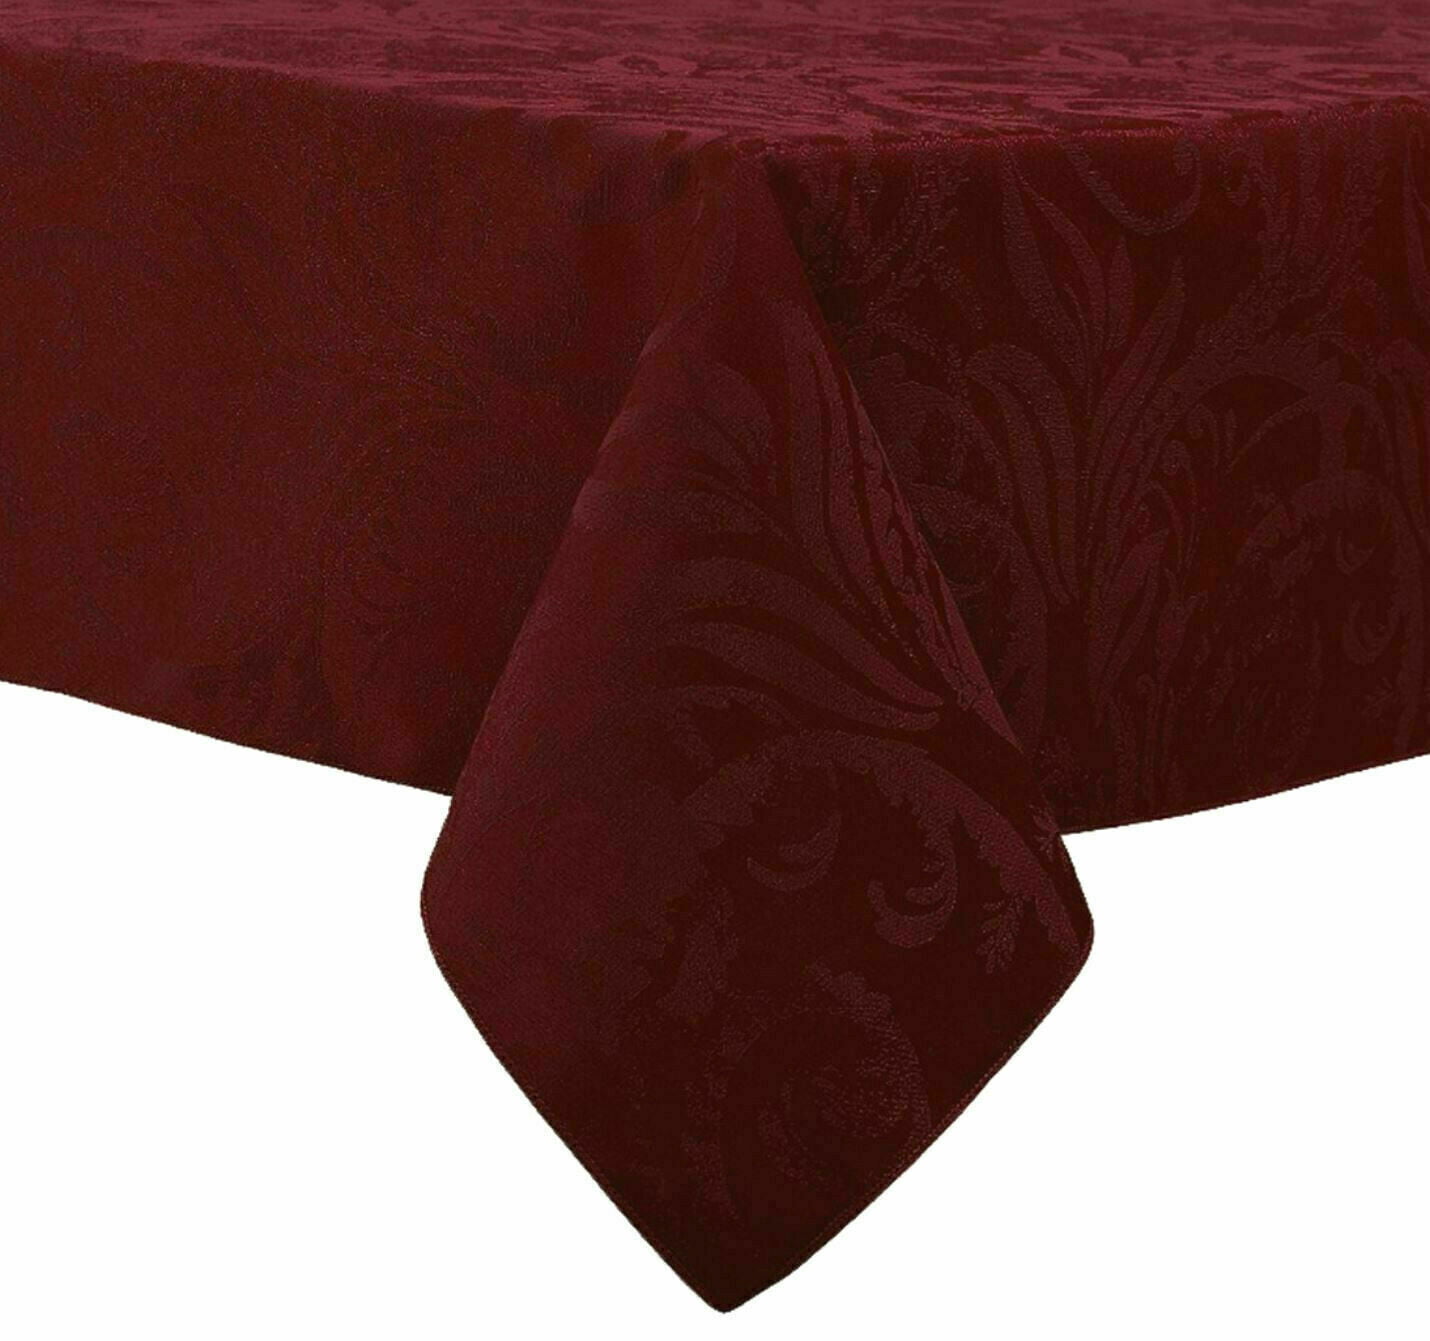 Autumn Vine Damask Tablecloth Oblong 60"x84" in Wine